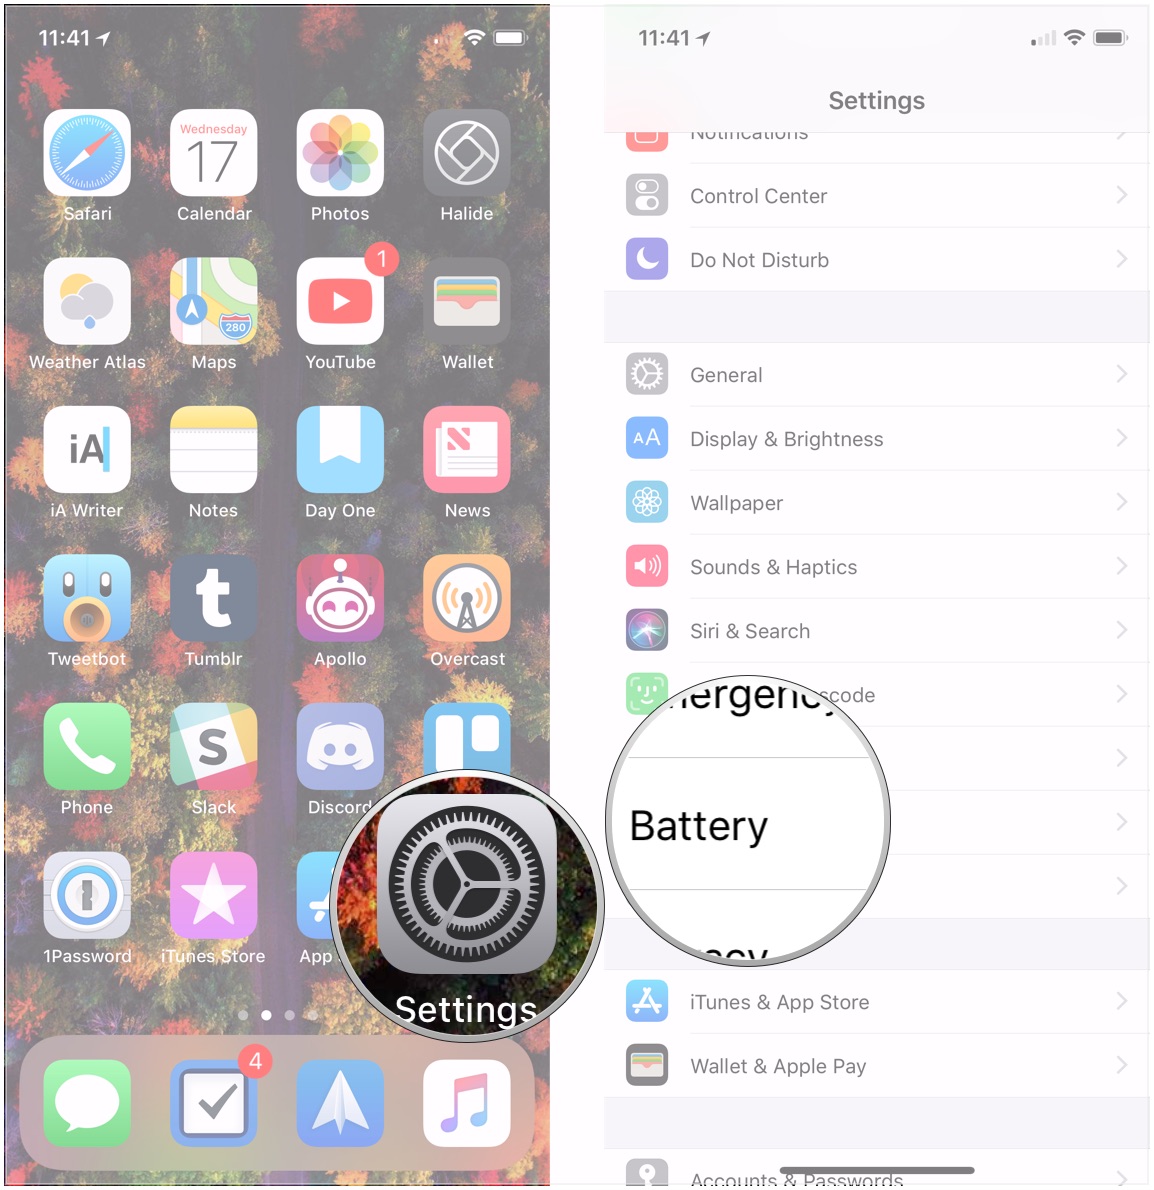 Battery troubleshooting showing how to reset your iPhone by tapping Erase all content and Settings, then tapping Erase Now